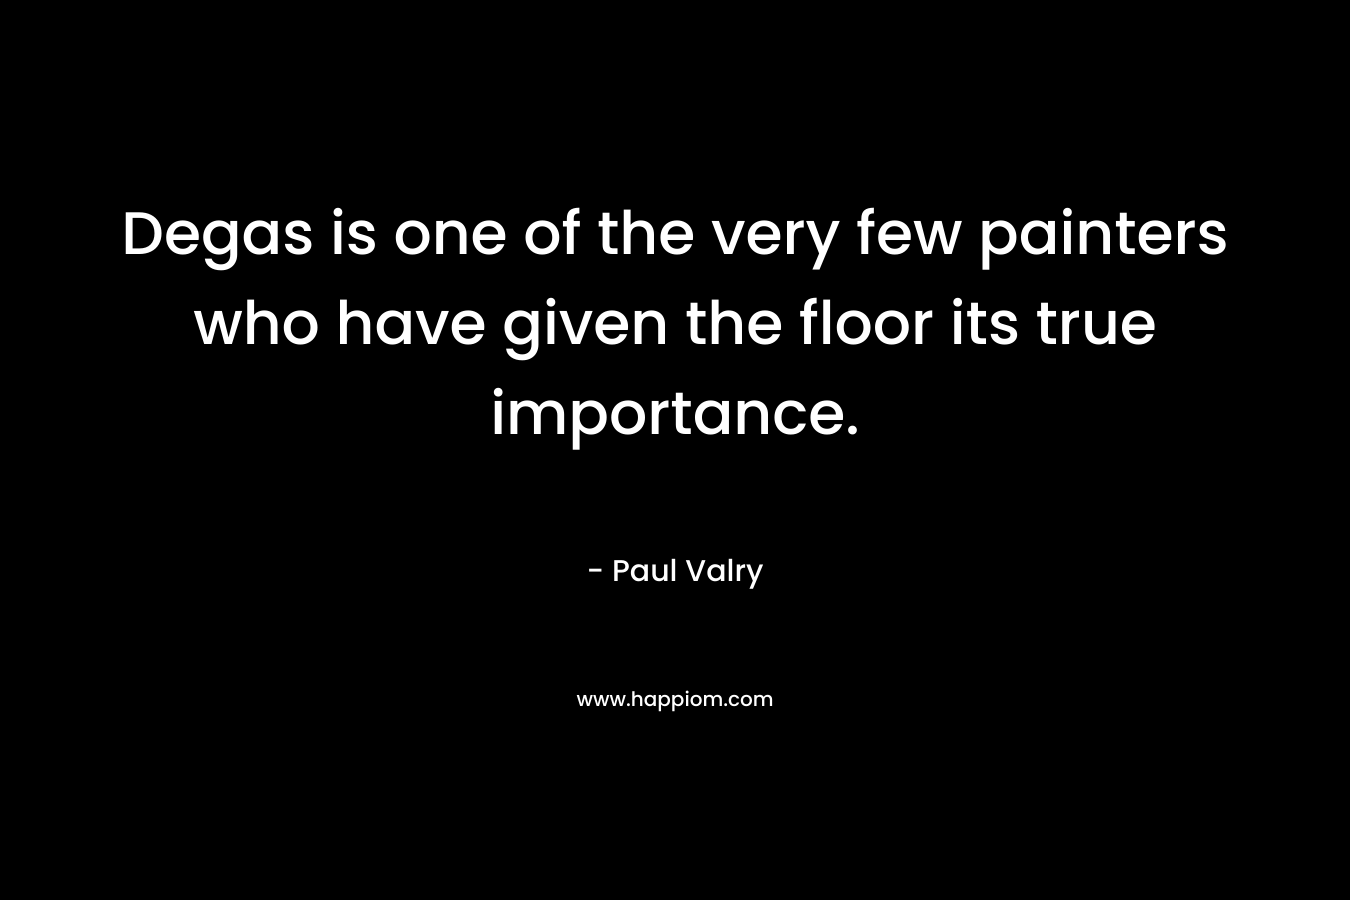 Degas is one of the very few painters who have given the floor its true importance. – Paul Valry